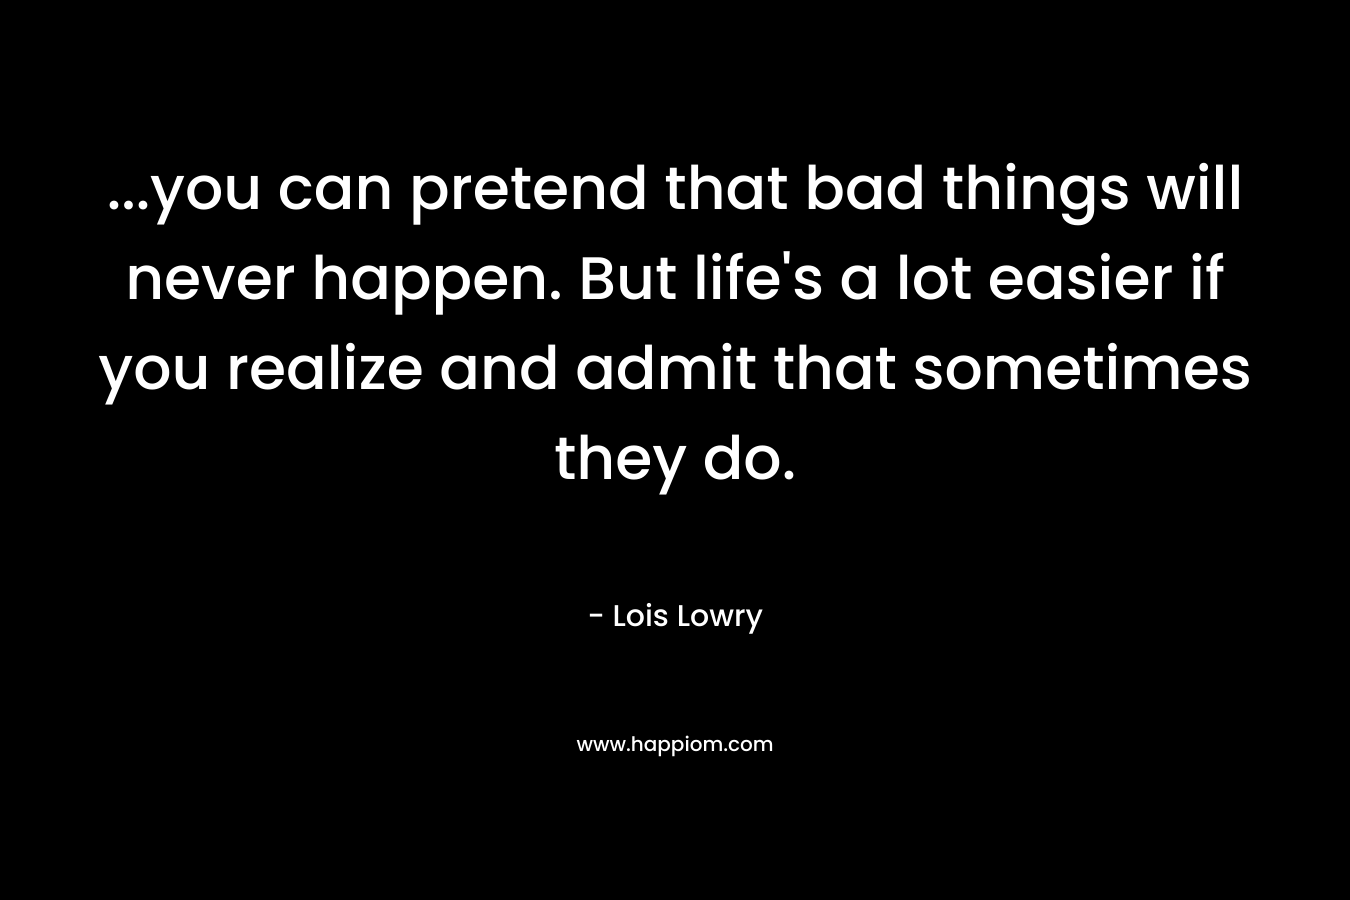 ...you can pretend that bad things will never happen. But life's a lot easier if you realize and admit that sometimes they do.